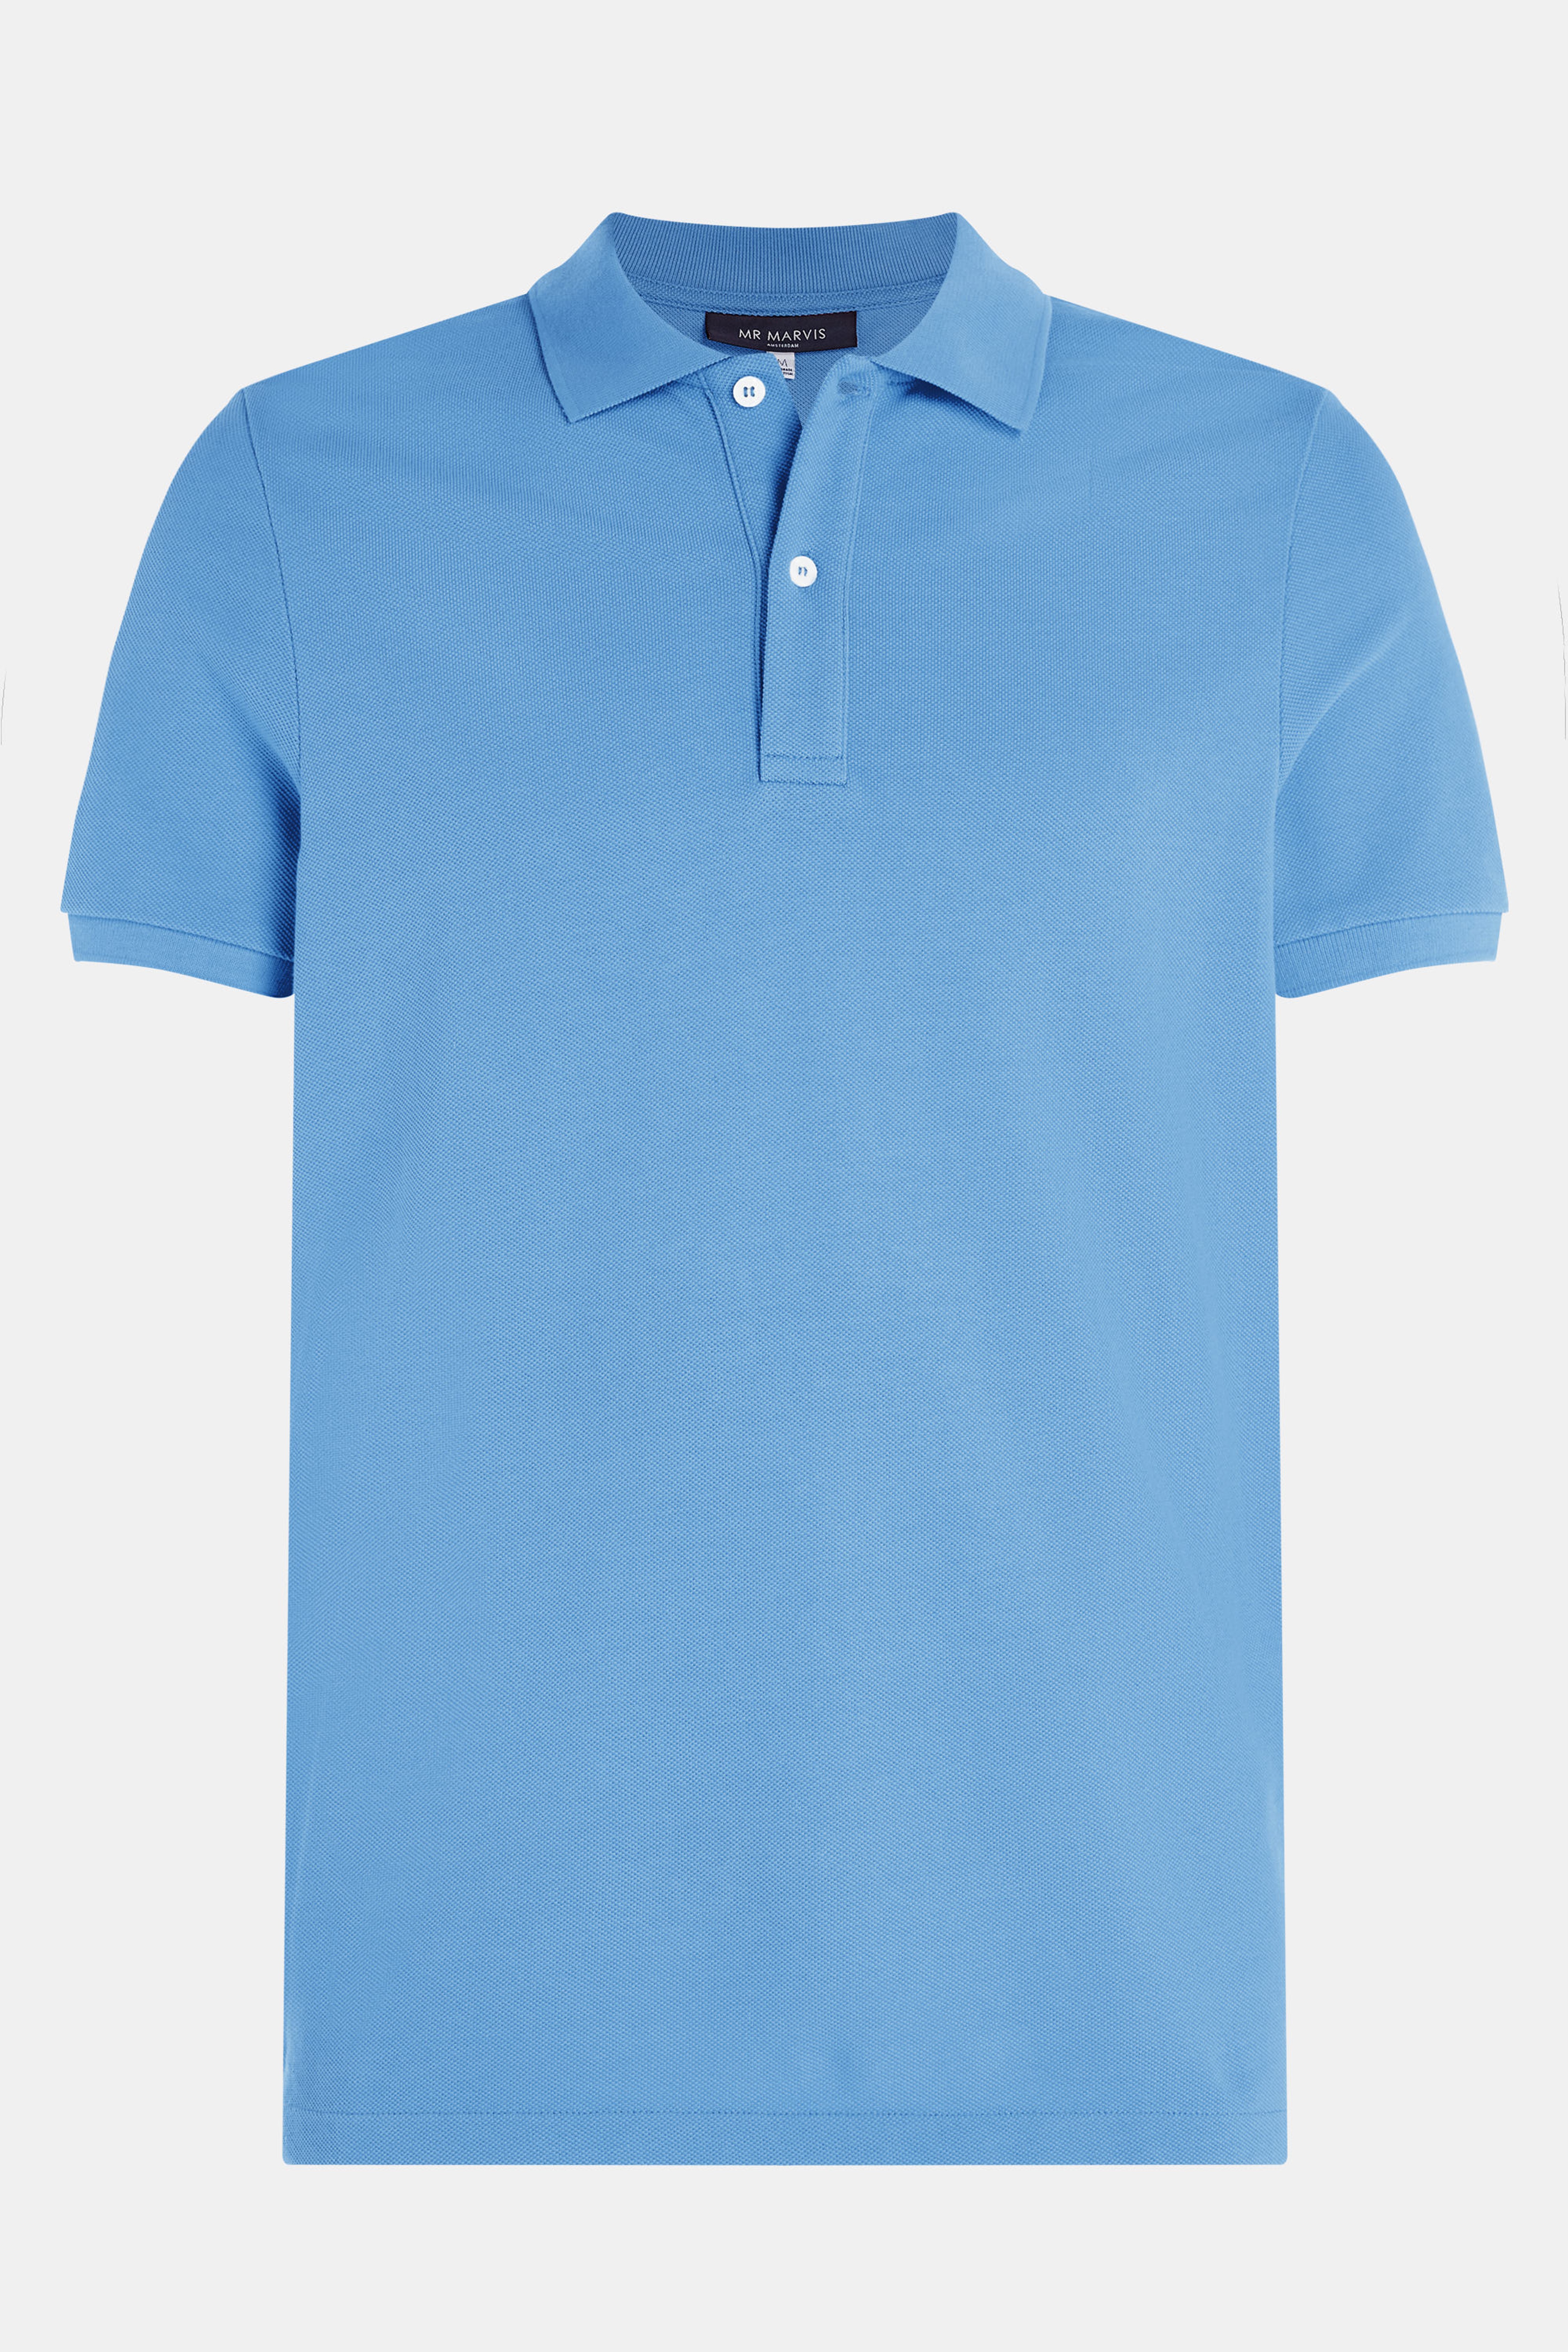 Boulevards - The Classic Polo